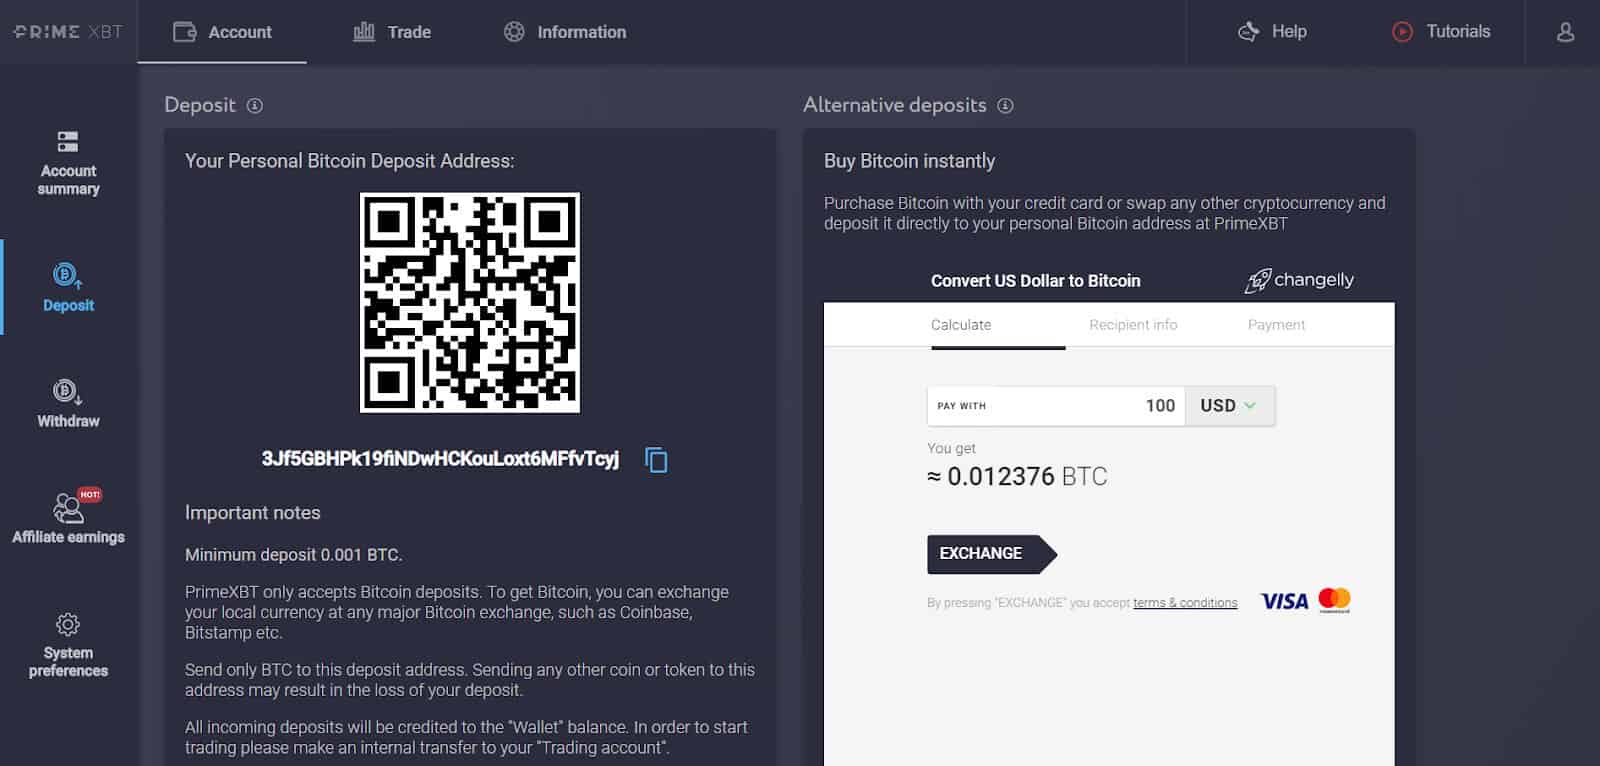 Users can simply scan a QR code to deposit BTC from another wallet